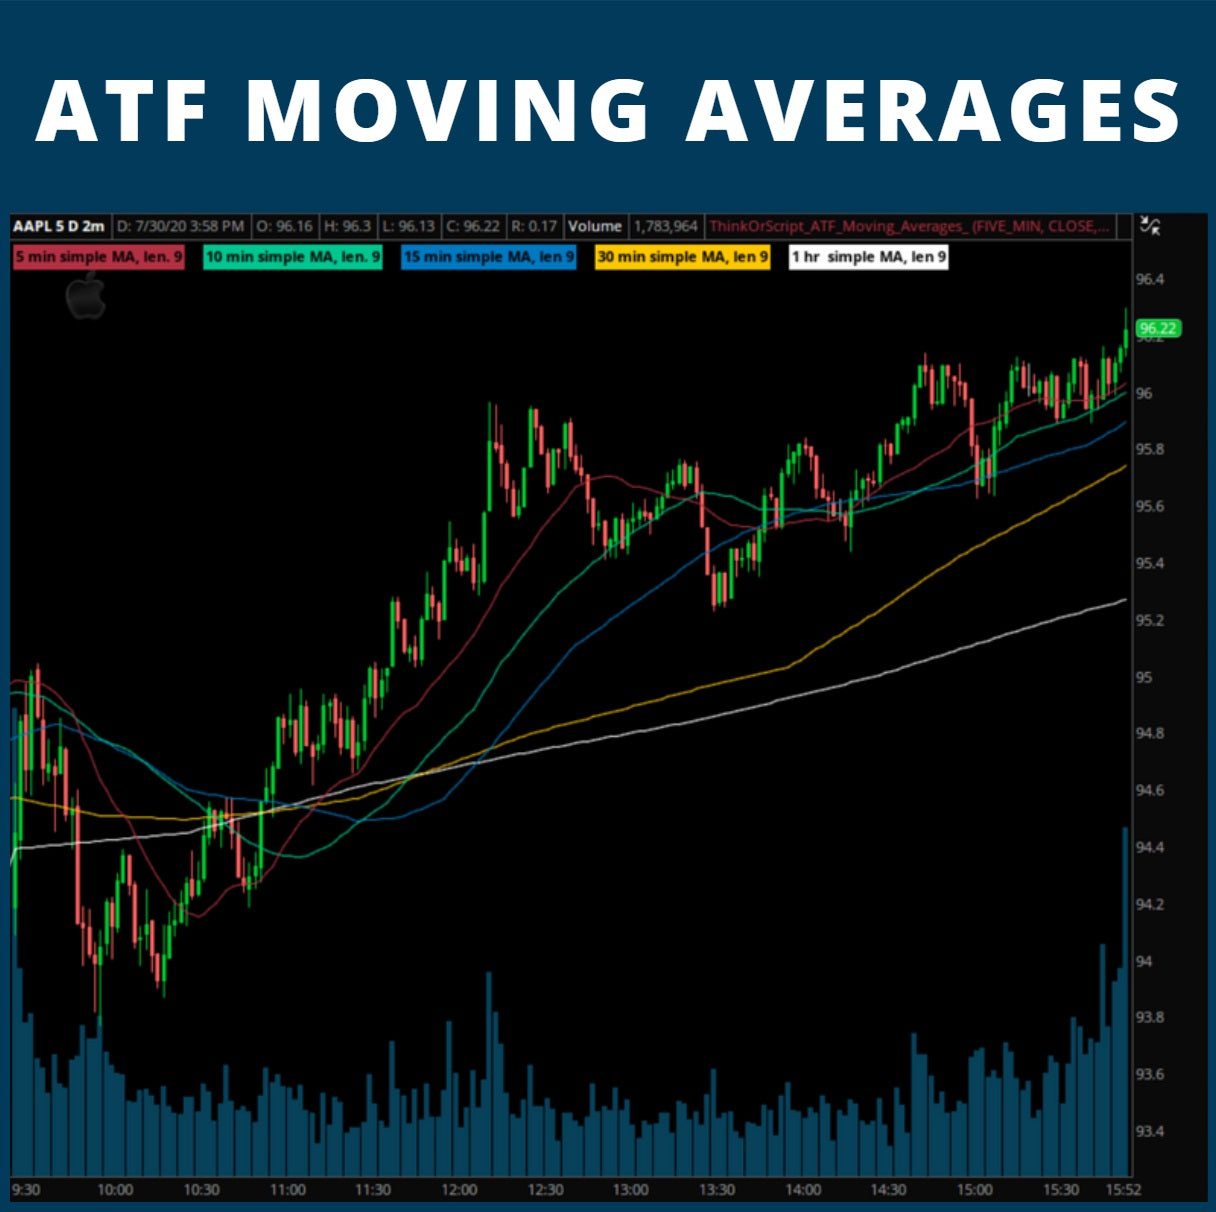 ATF Moving Averages